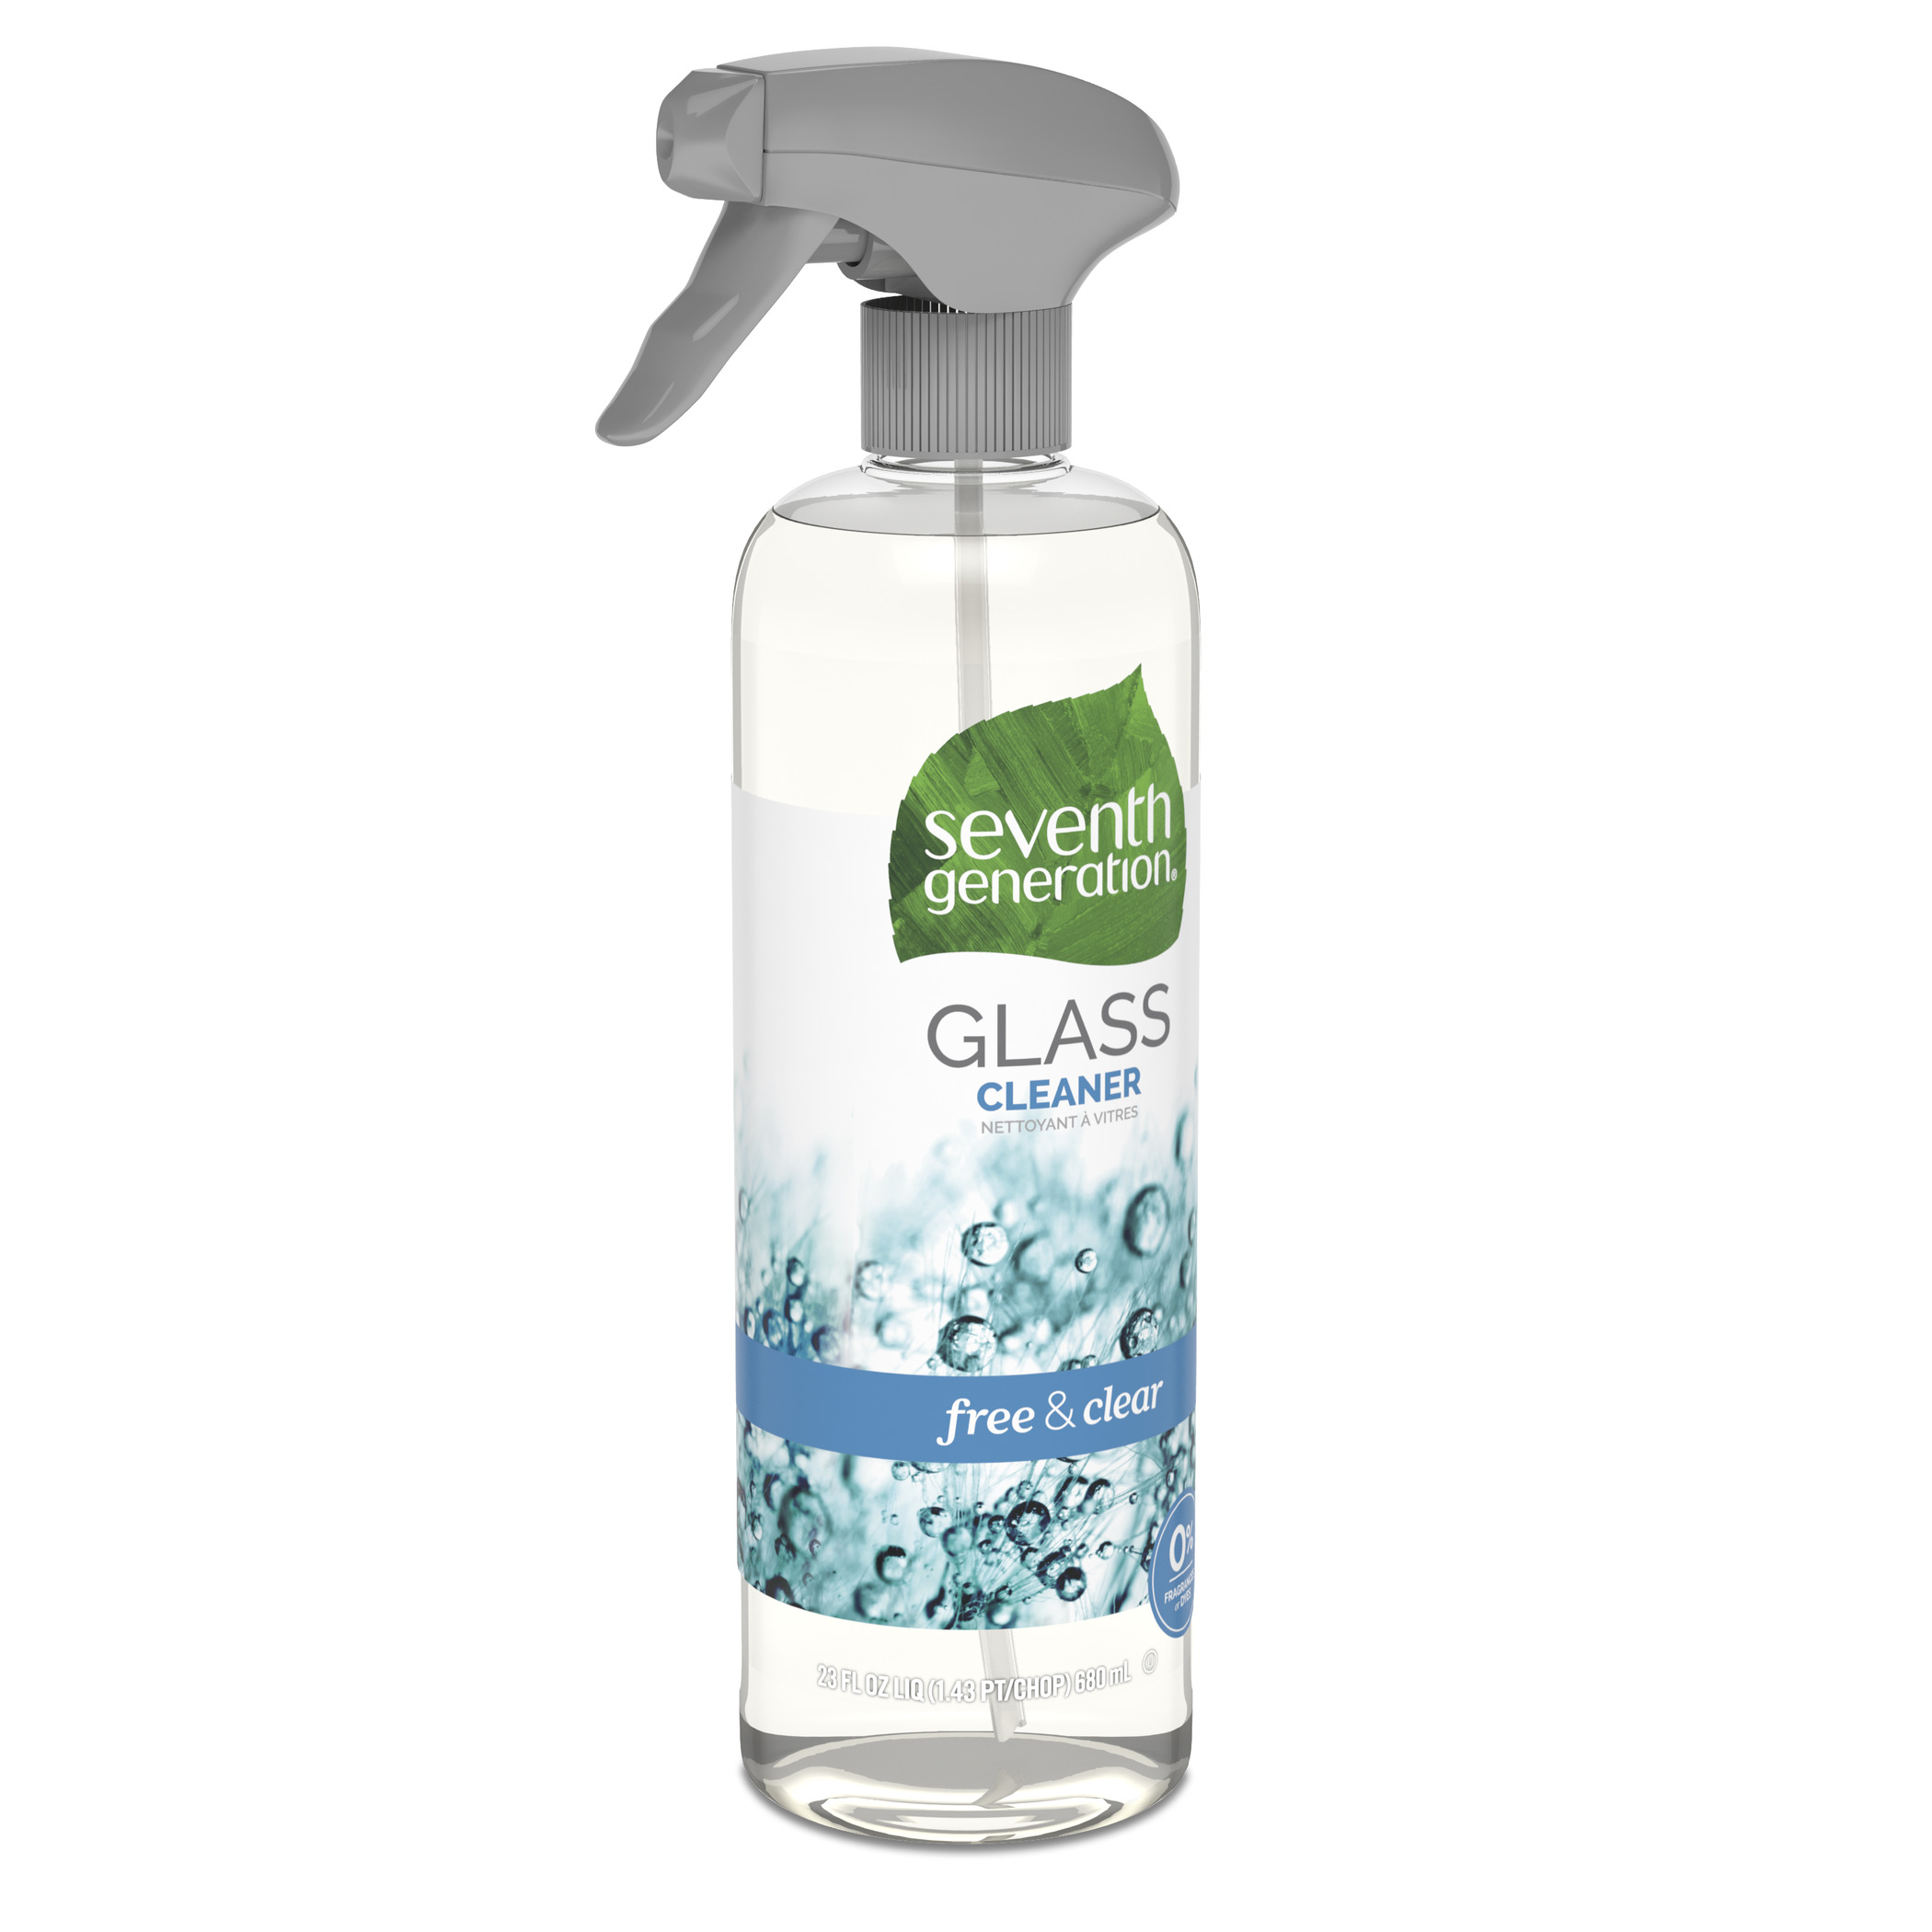 Seventh Generation Glass Cleaner, Free & Clear, 23 oz - image 3 of 6